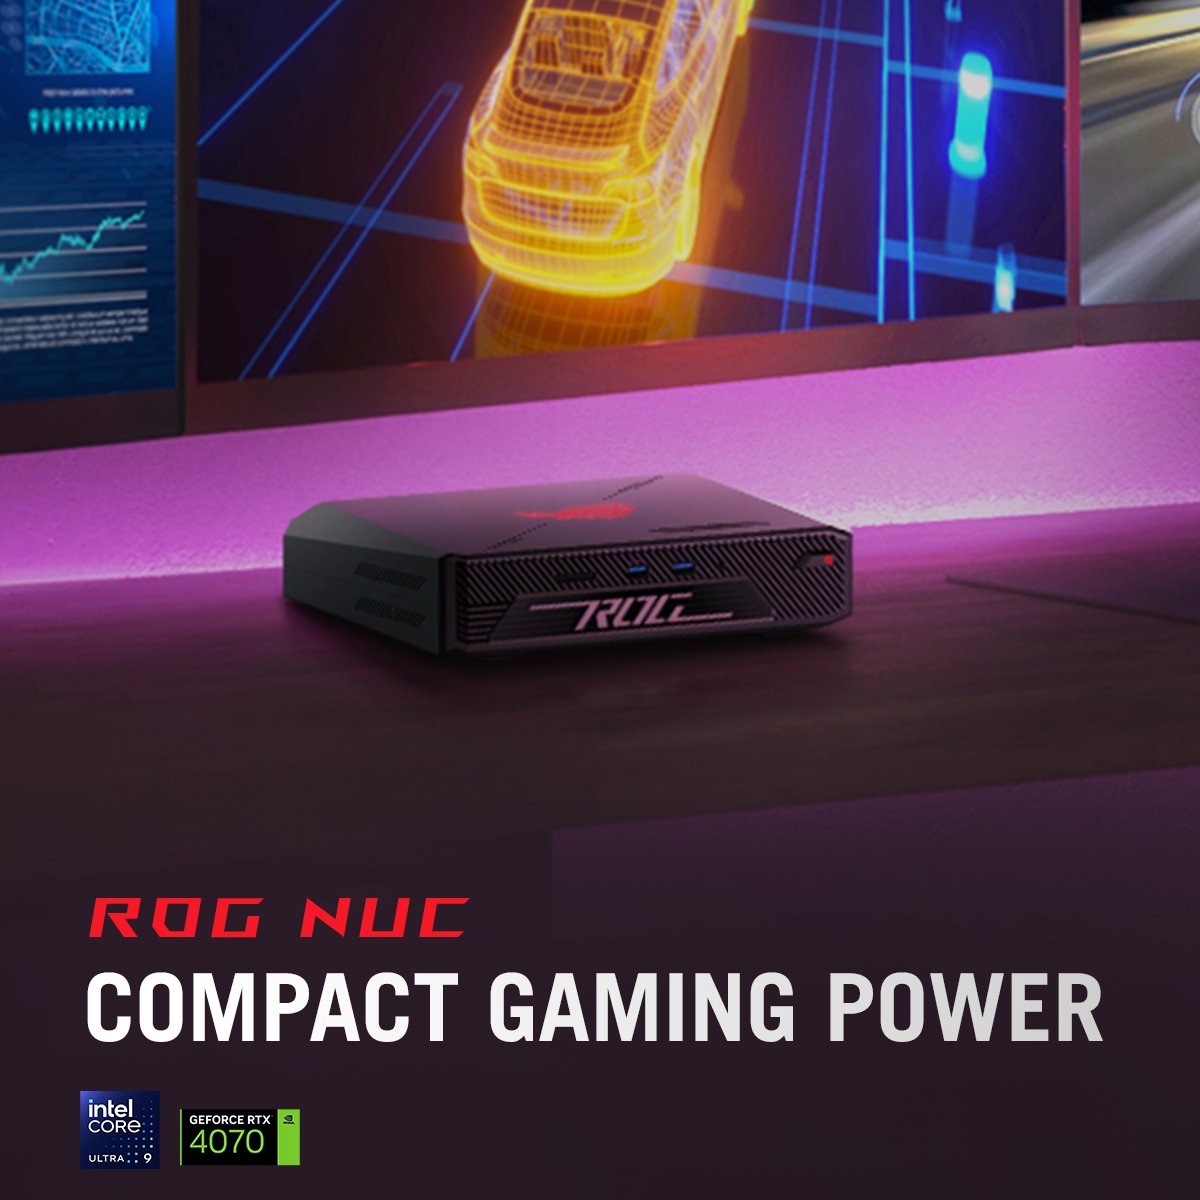 🚀Small but mighty: meet the #ROG #NUC 2.5-Liter! Its versatile design blends into any space, while its Intel® Core™ Ultra 9 processors and NVIDIA® RTX™ 4070 graphics deliver unrivaled power and performance. 💯 👉🏻Learn more: rog.gg/nuc #NvidiaRTX4070 #MiniPC